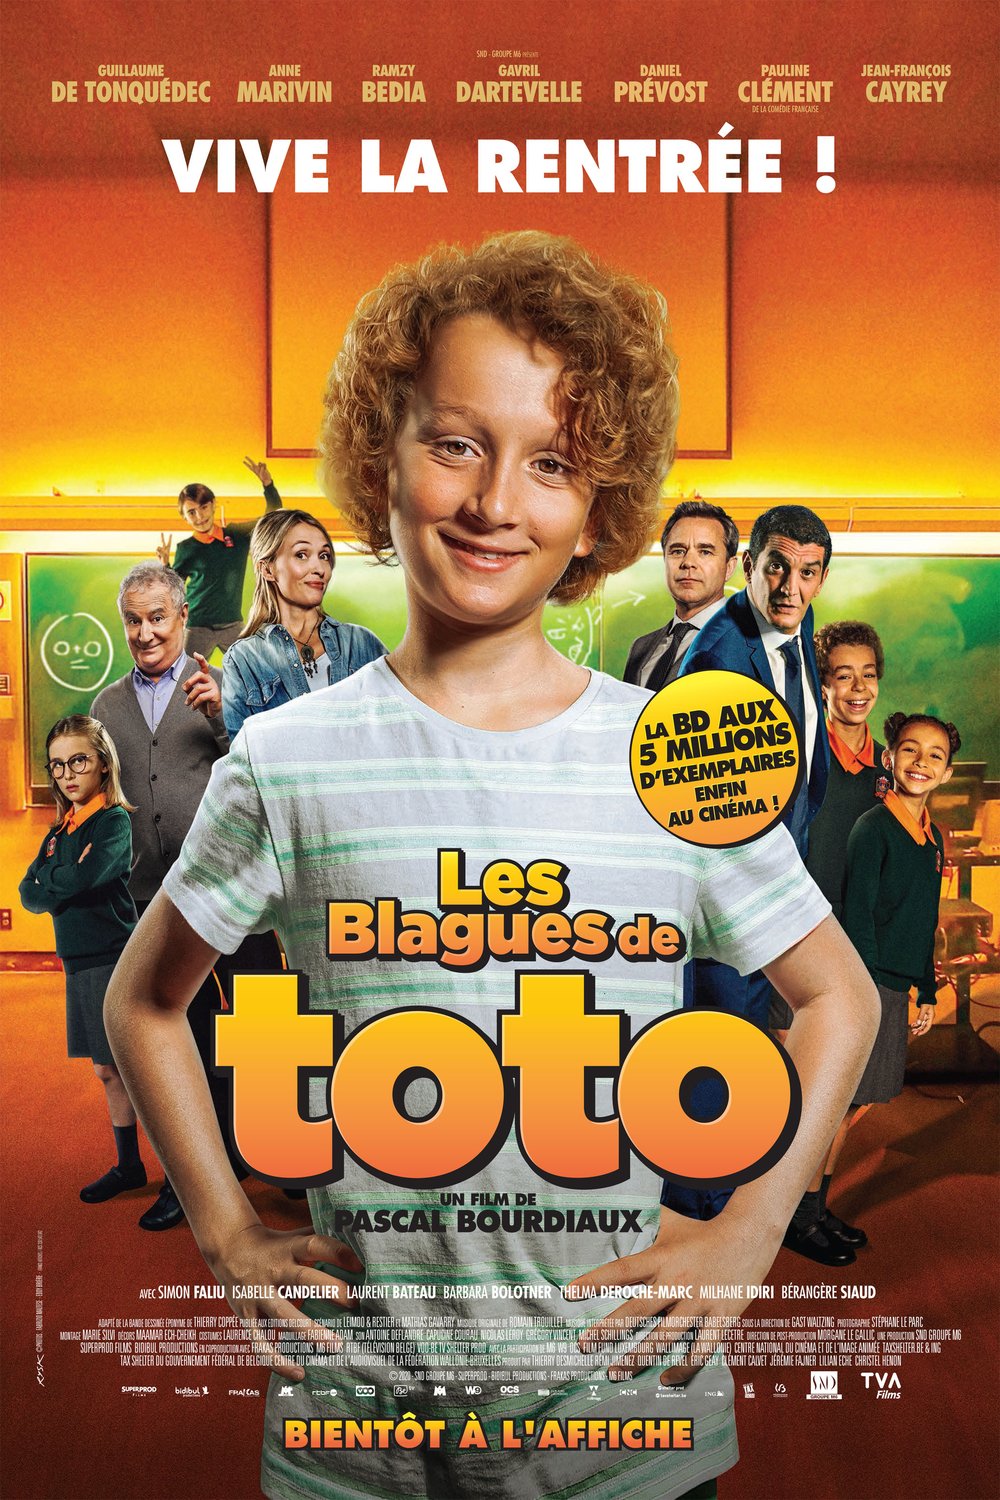 Poster of the movie Les blagues de Toto